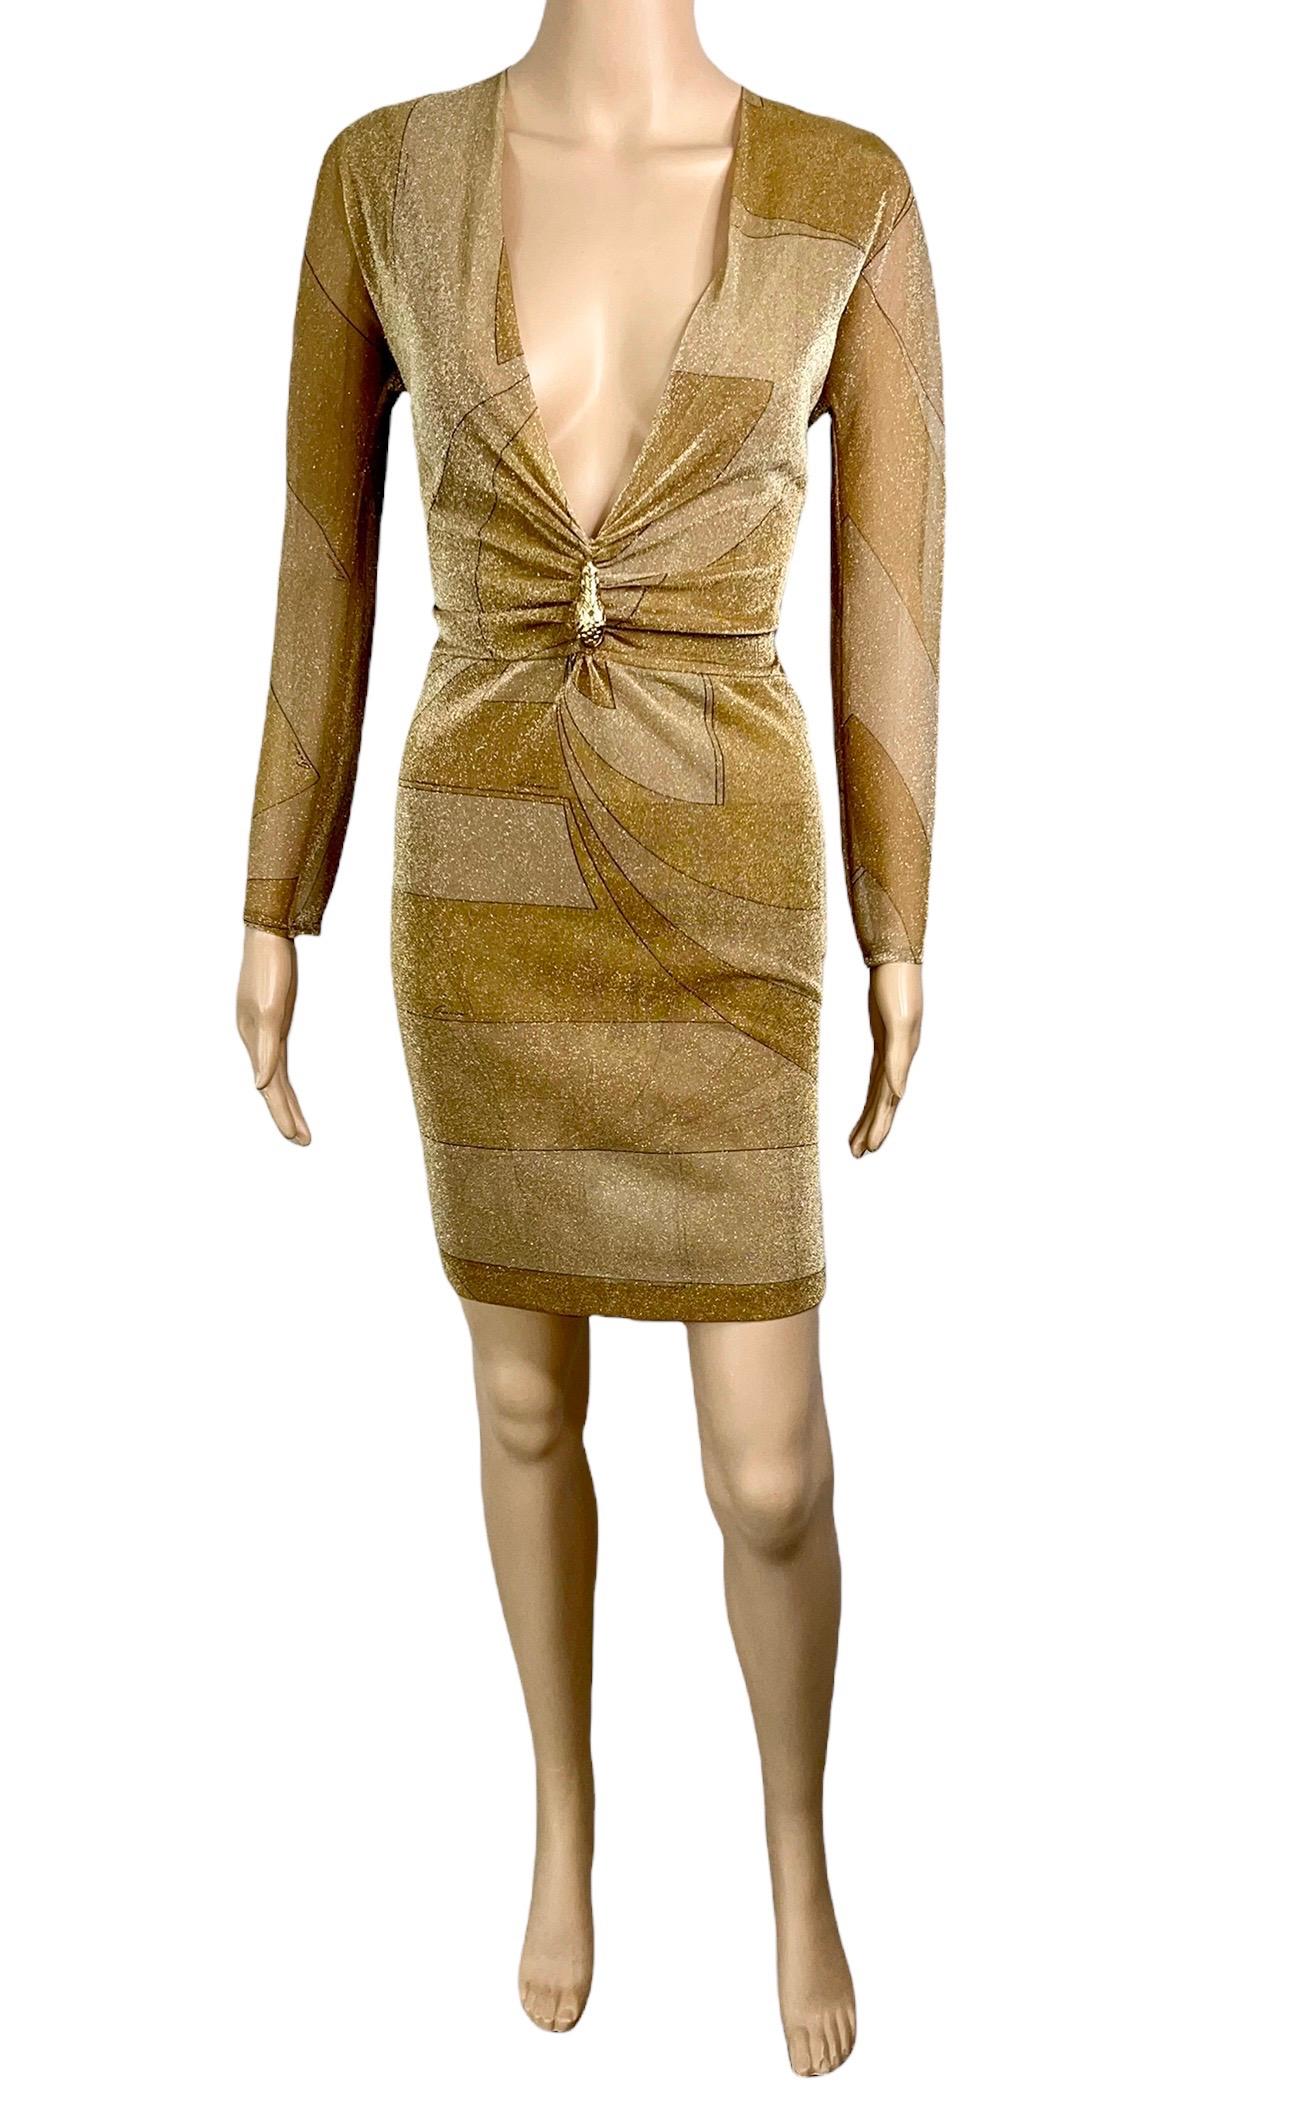 Tom Ford for Gucci F/W 2000 Runway Plunged Neckline Metallic Knit Mini Dress For Sale 1